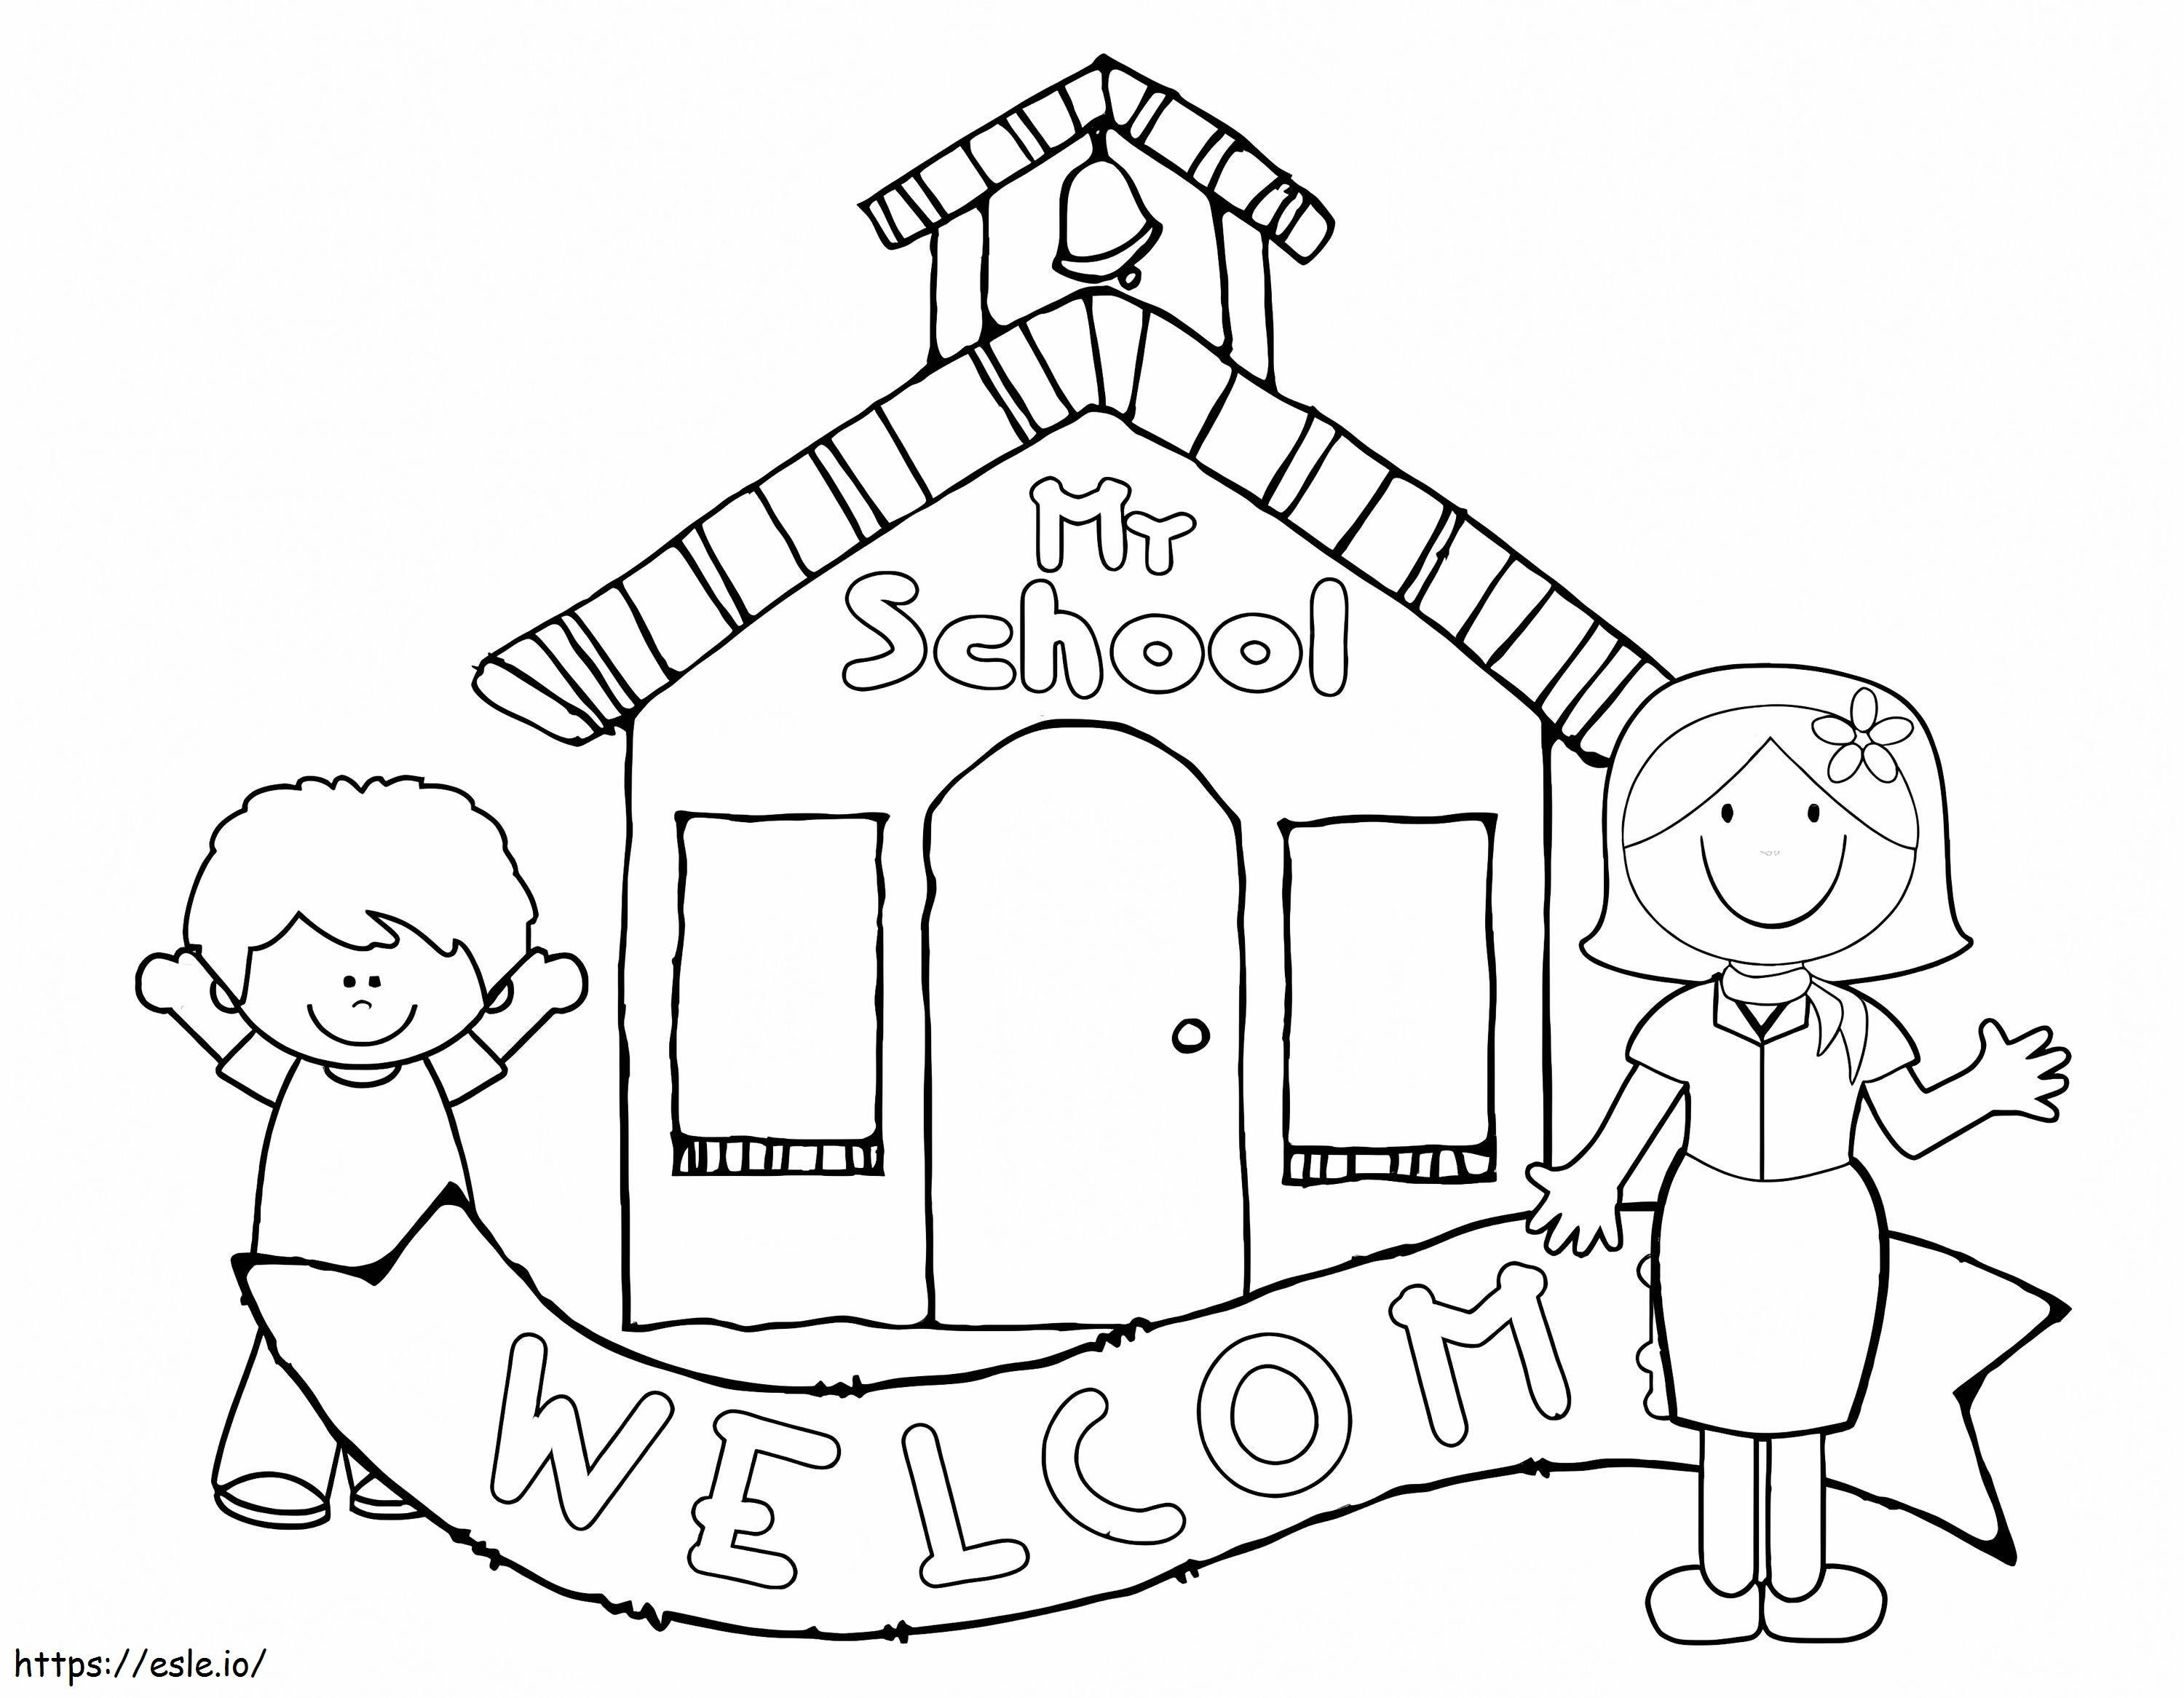 Welcome to kindergarten coloring page